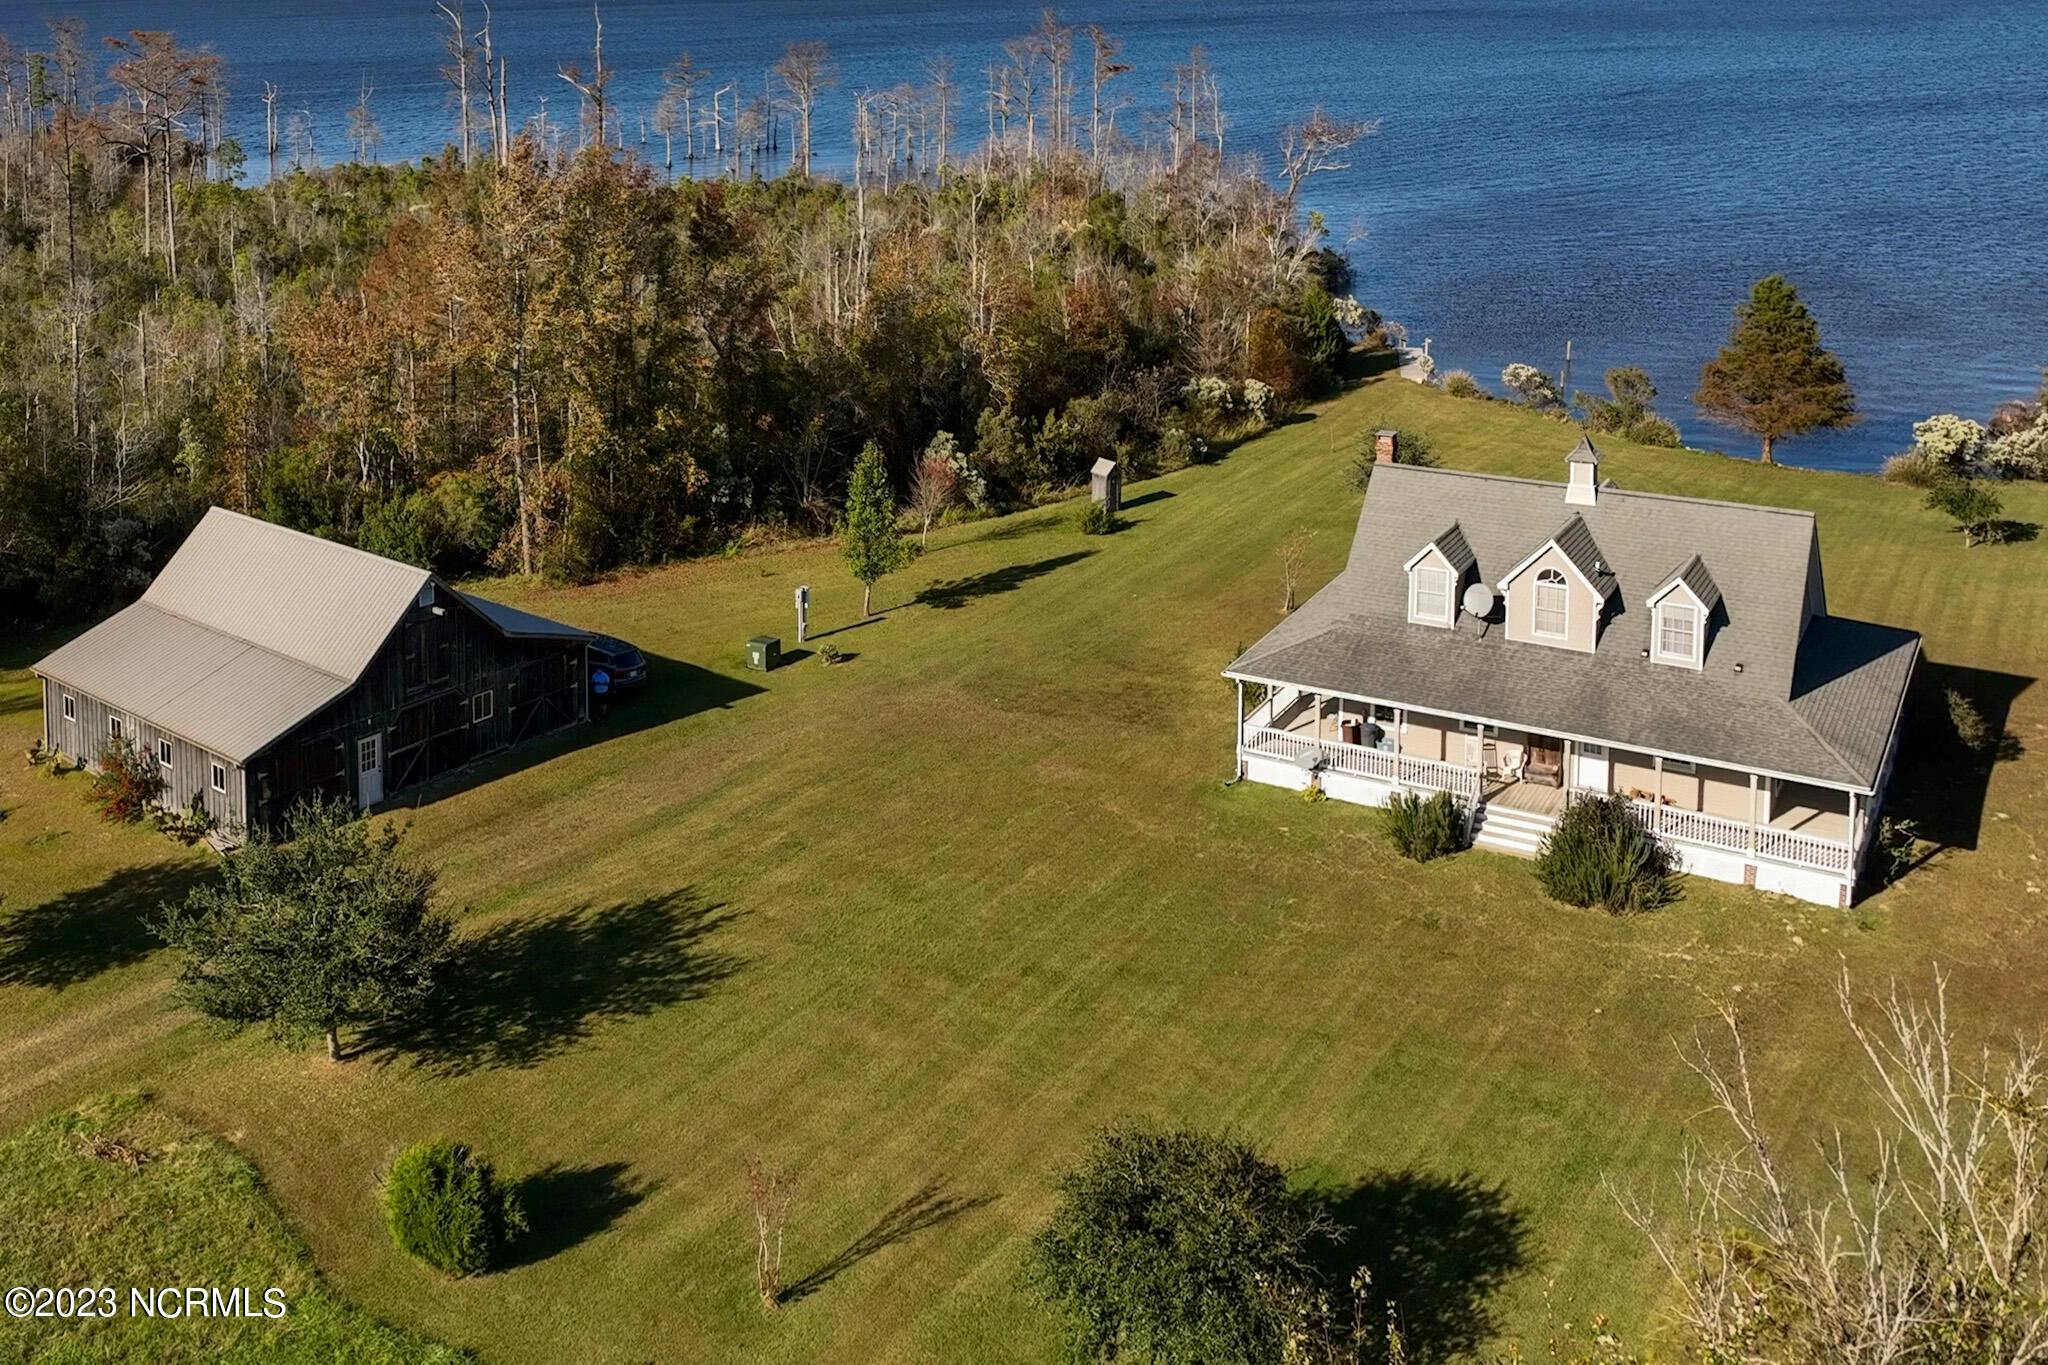 92 Acres & Home on the River